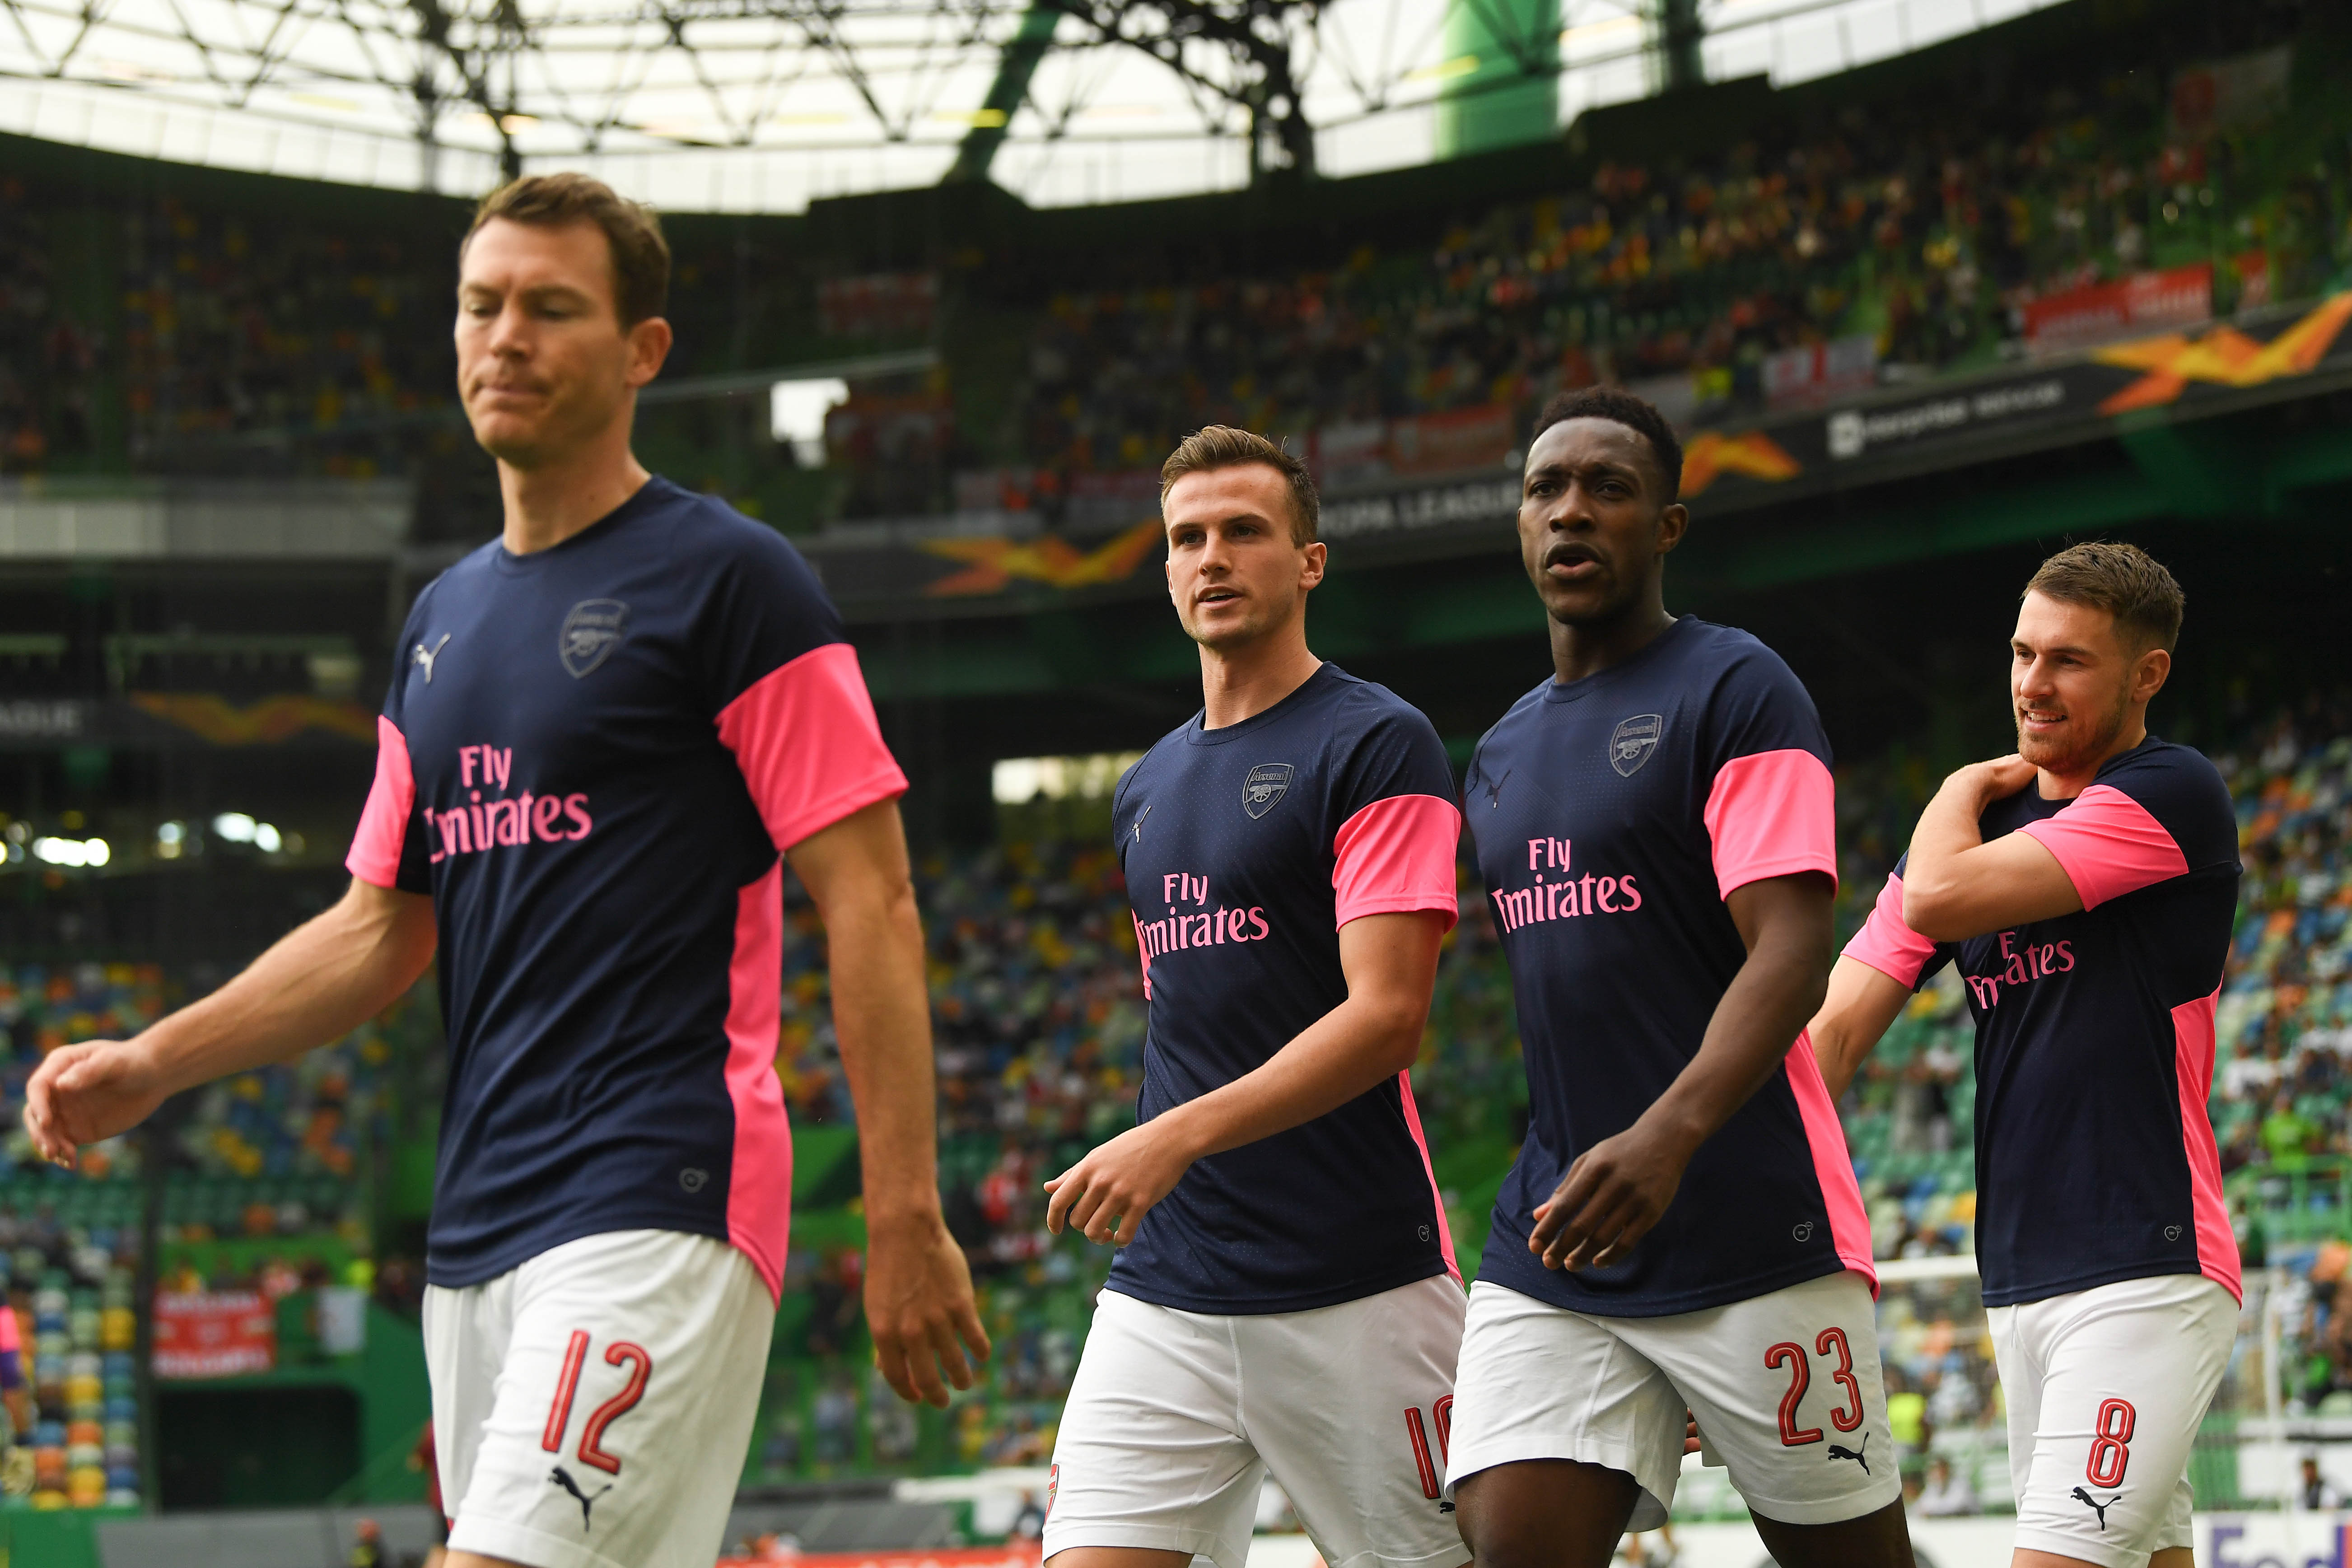 LISBON, PORTUGAL - OCTOBER 25: (L-R)  Stephan Lichteiner, Rob Holding, Danny Welbeck and Aaron Ramsey of Arsenal FC look on during the warm up prior to  the UEFA Europa League Group E match between Sporting CP and Arsenal at Estadio Jose Alvalade on October 25, 2018 in Lisbon, Portugal.  (Photo by David Ramos/Getty Images)